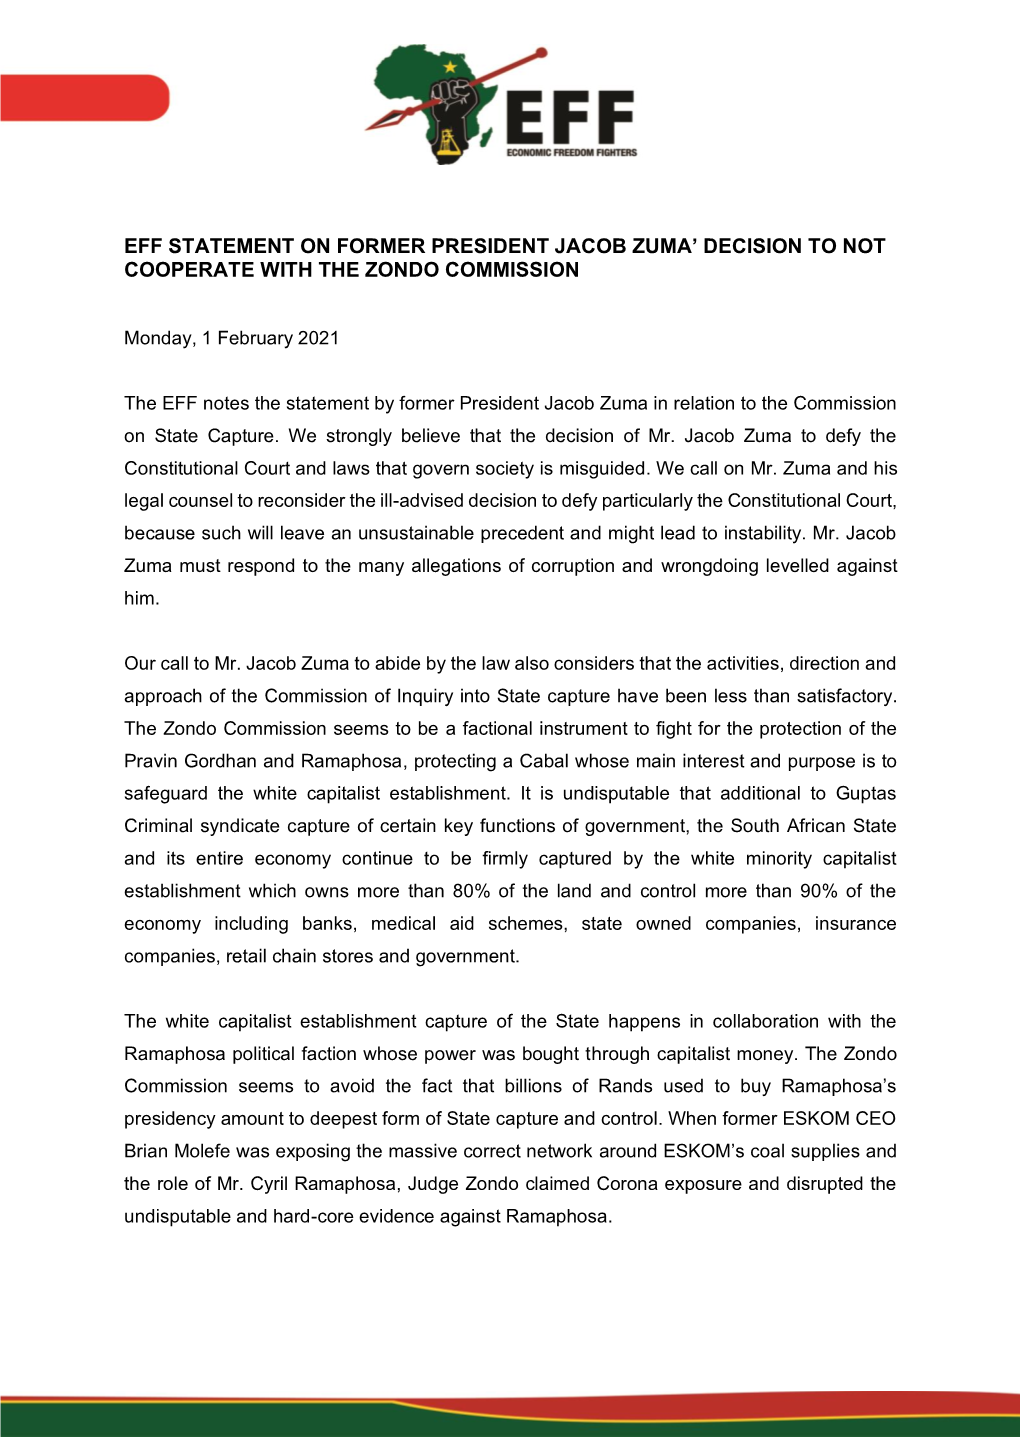 Eff Statement on Former President Jacob Zuma’ Decision to Not Cooperate with the Zondo Commission